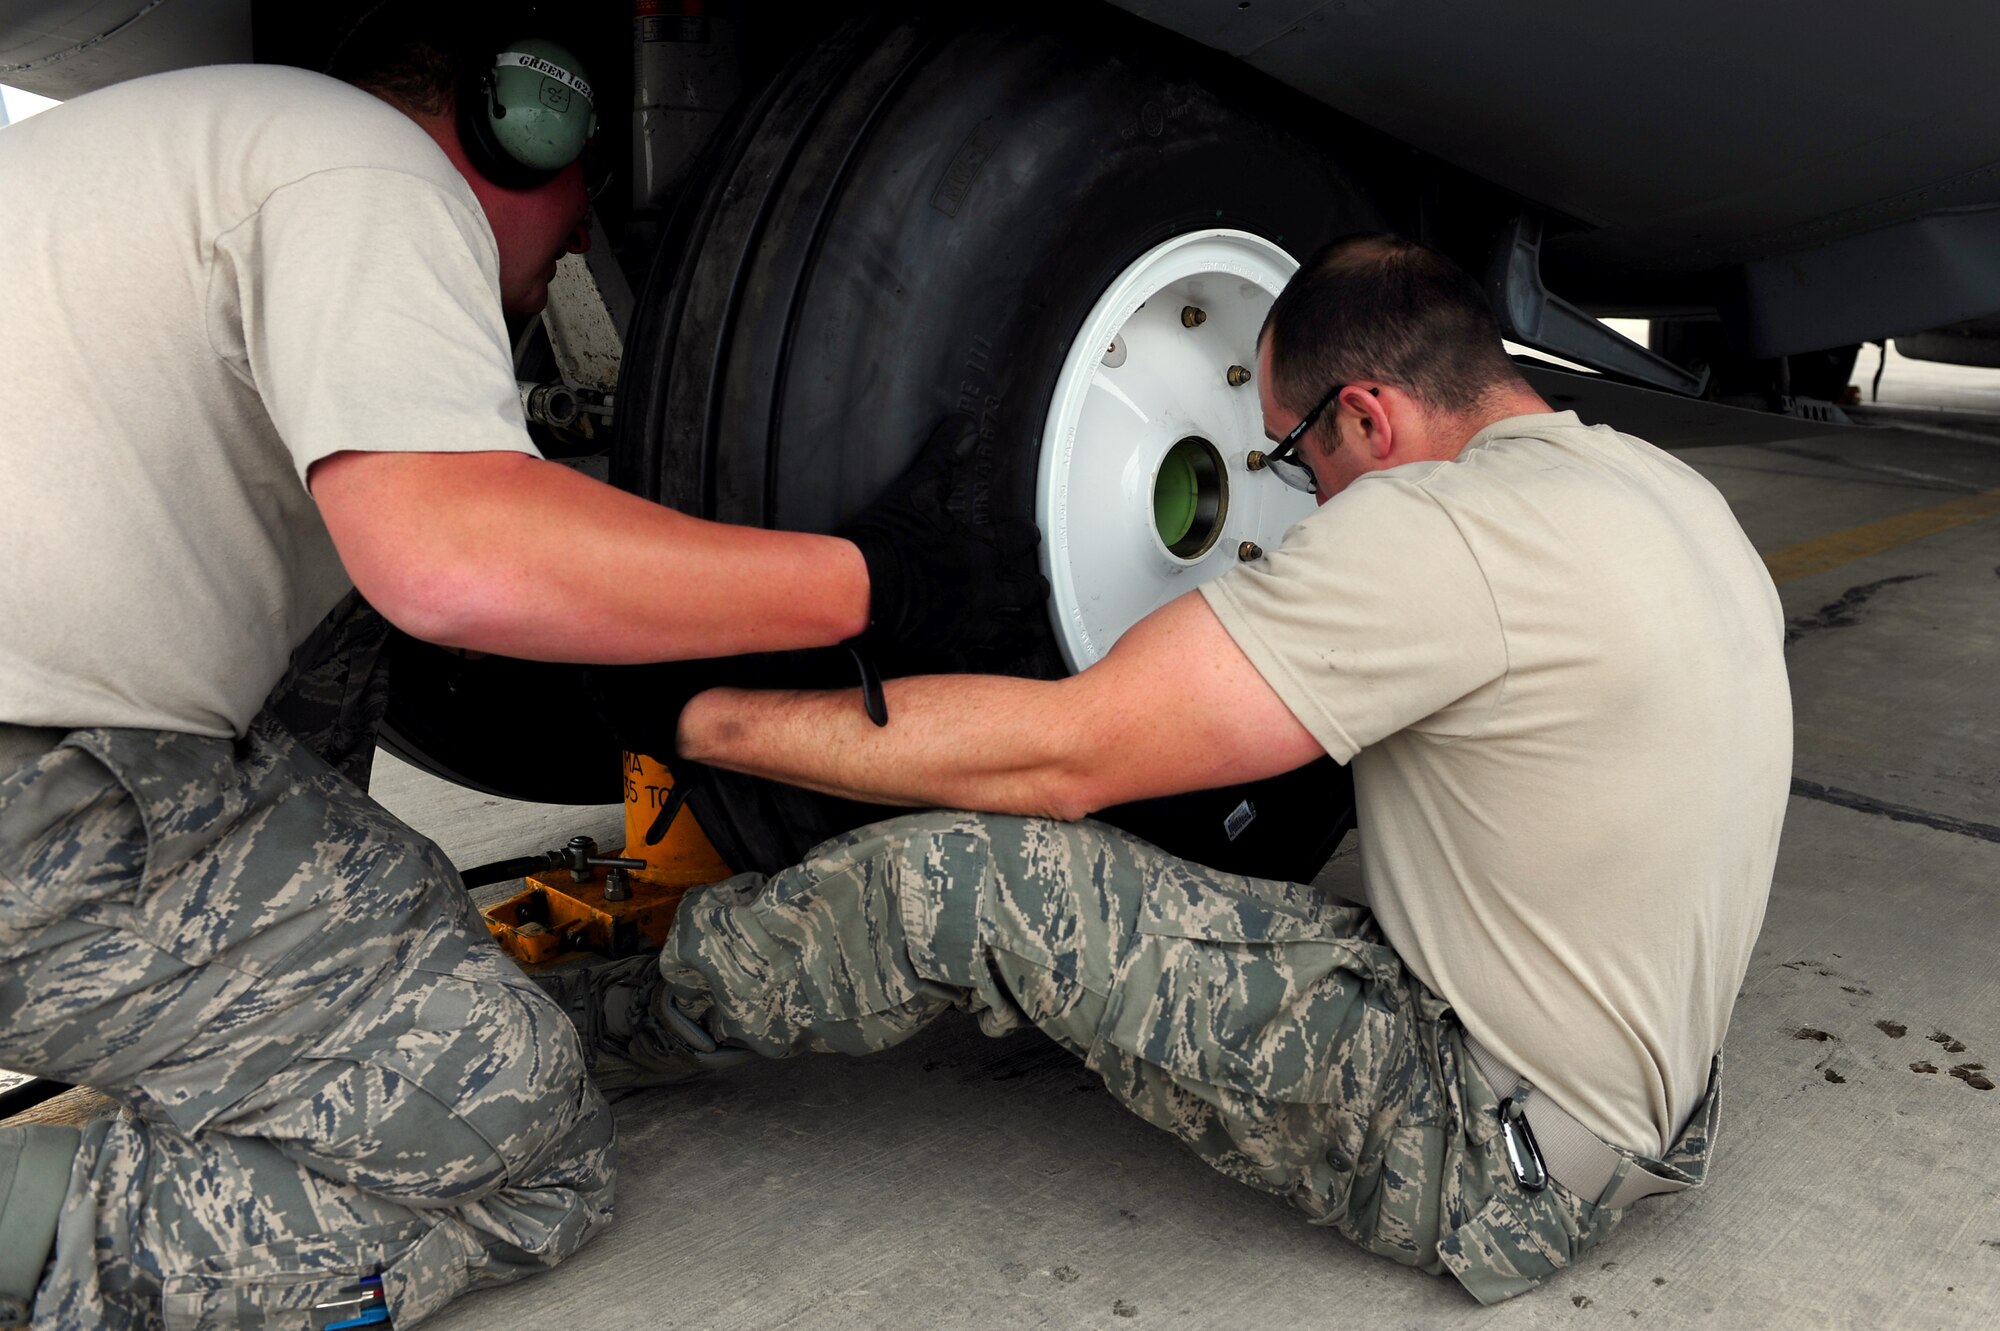 U.S. Air Force Staff Sgt. John Green and Staff Sgt. Justin Greenhow, 455th Expeditionary Aircraft Maintenance Squadron crew chiefs, position a fresh tire onto the nose landing gear of a C-130 Hercules aircraft during a tire change procedure at Bagram Airfield, Afghanistan, April 9, 2011. Green and Greenhow are deployed from the Delaware Air National Guard’s 166th Aircraft Maintenance Squadron, New Castle, Del., supporting Operation Enduring Freedom. (U.S. Air Force photo/Master Sgt. William Greer)